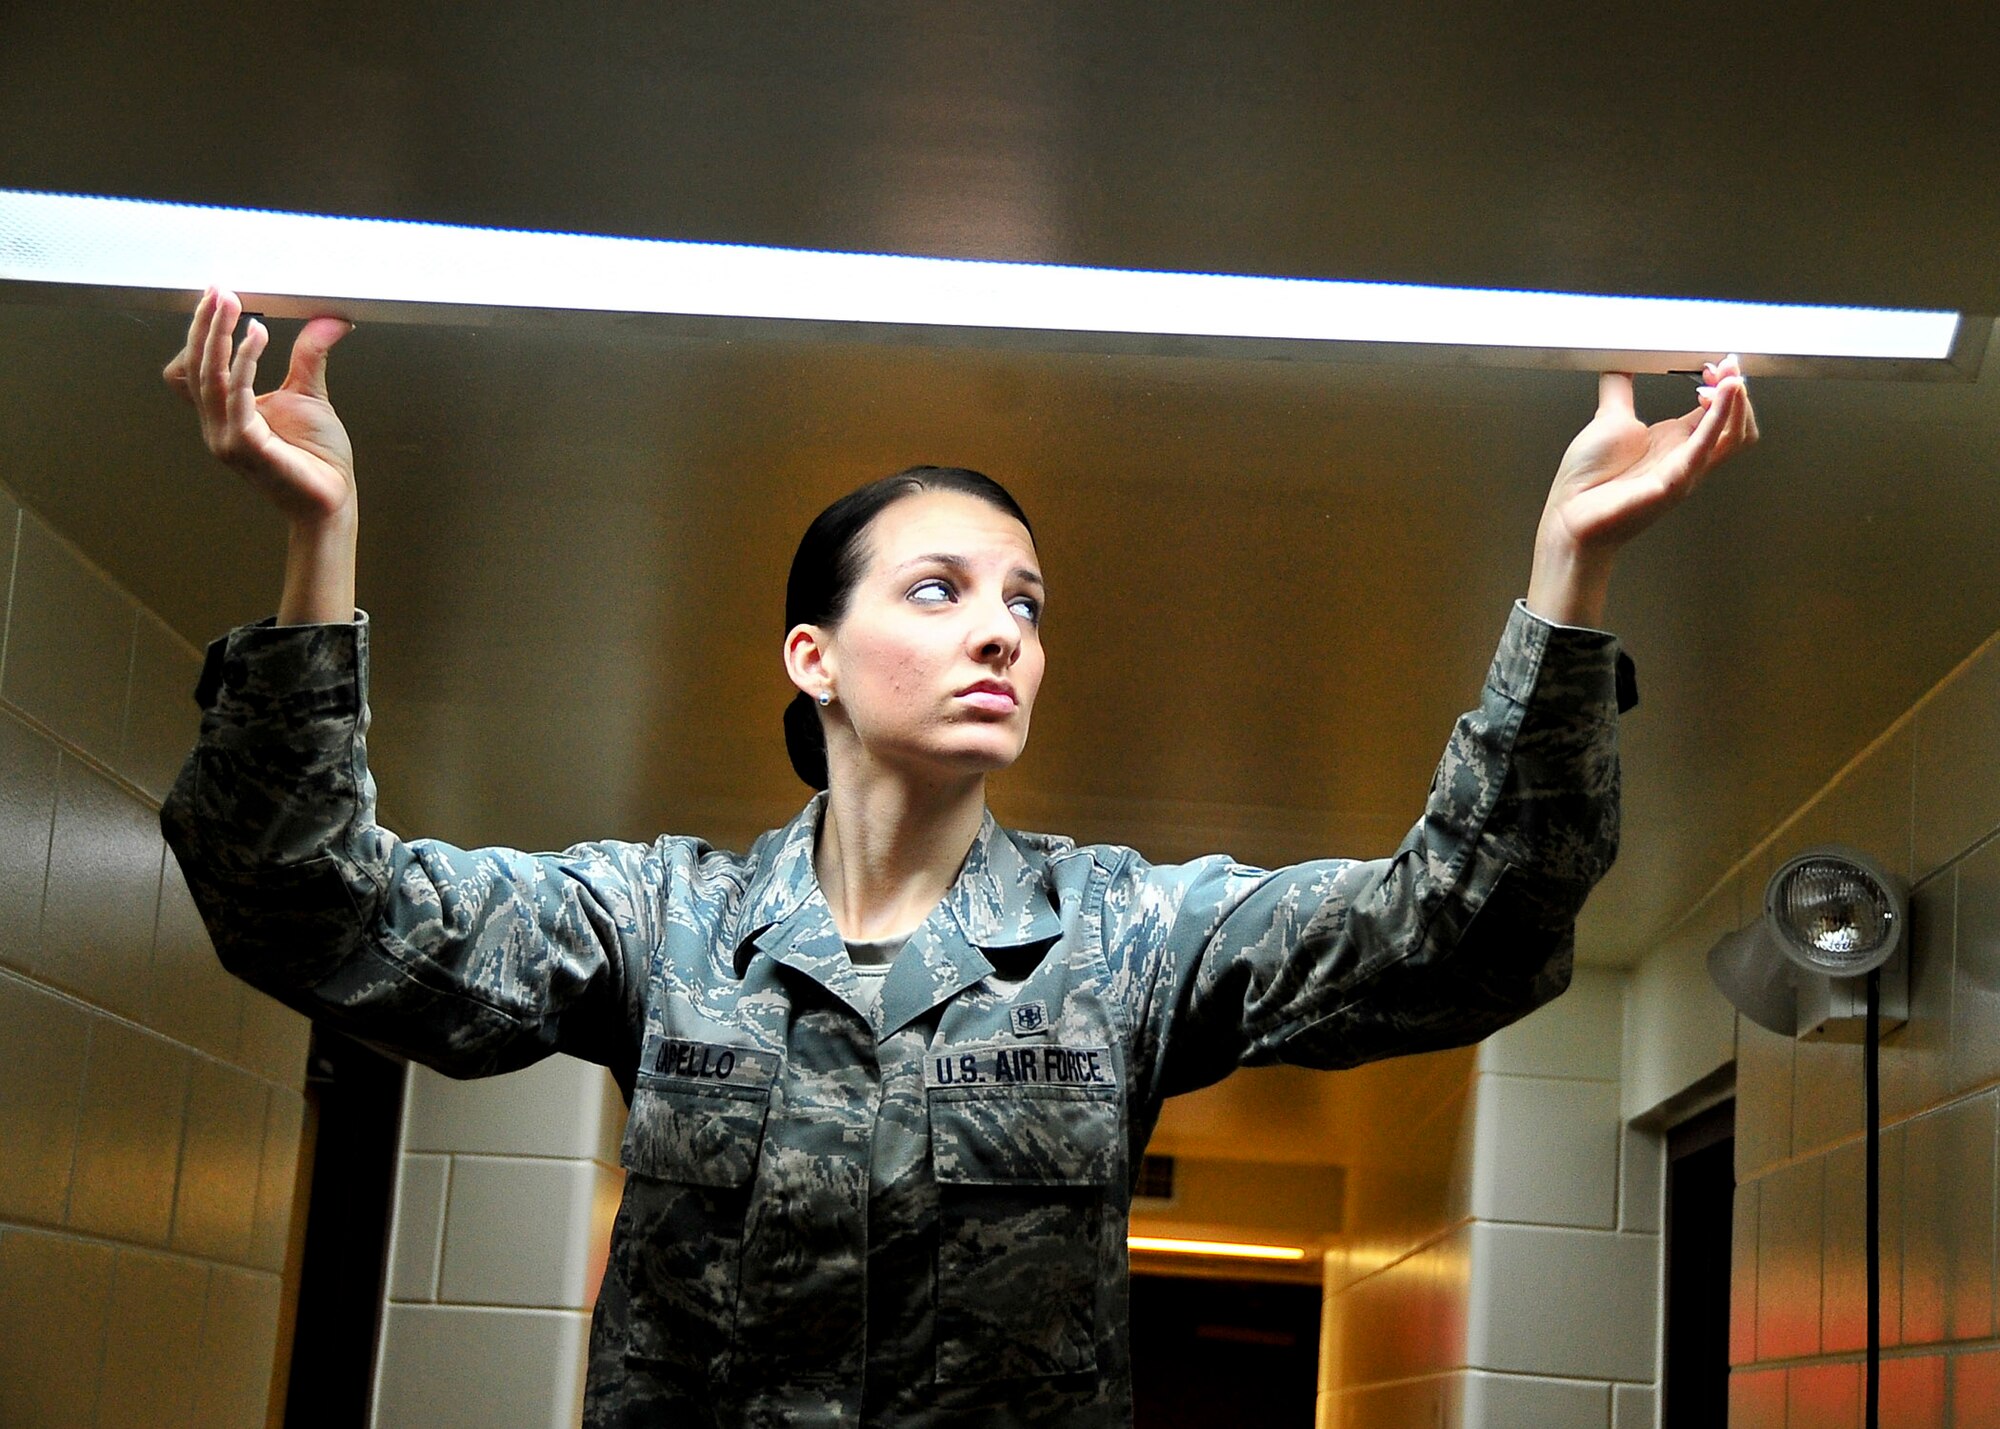 Staff Sgt. Amber Capello, 51st Civil Engineer Squadron Airman dorm leader, changes out a light fixture in a hallway here, Feb. 29, 2012.  Capello is responsible for dormitories which house 192 residents. (U.S. Air Force photo/Senior Airman Adam Grant)